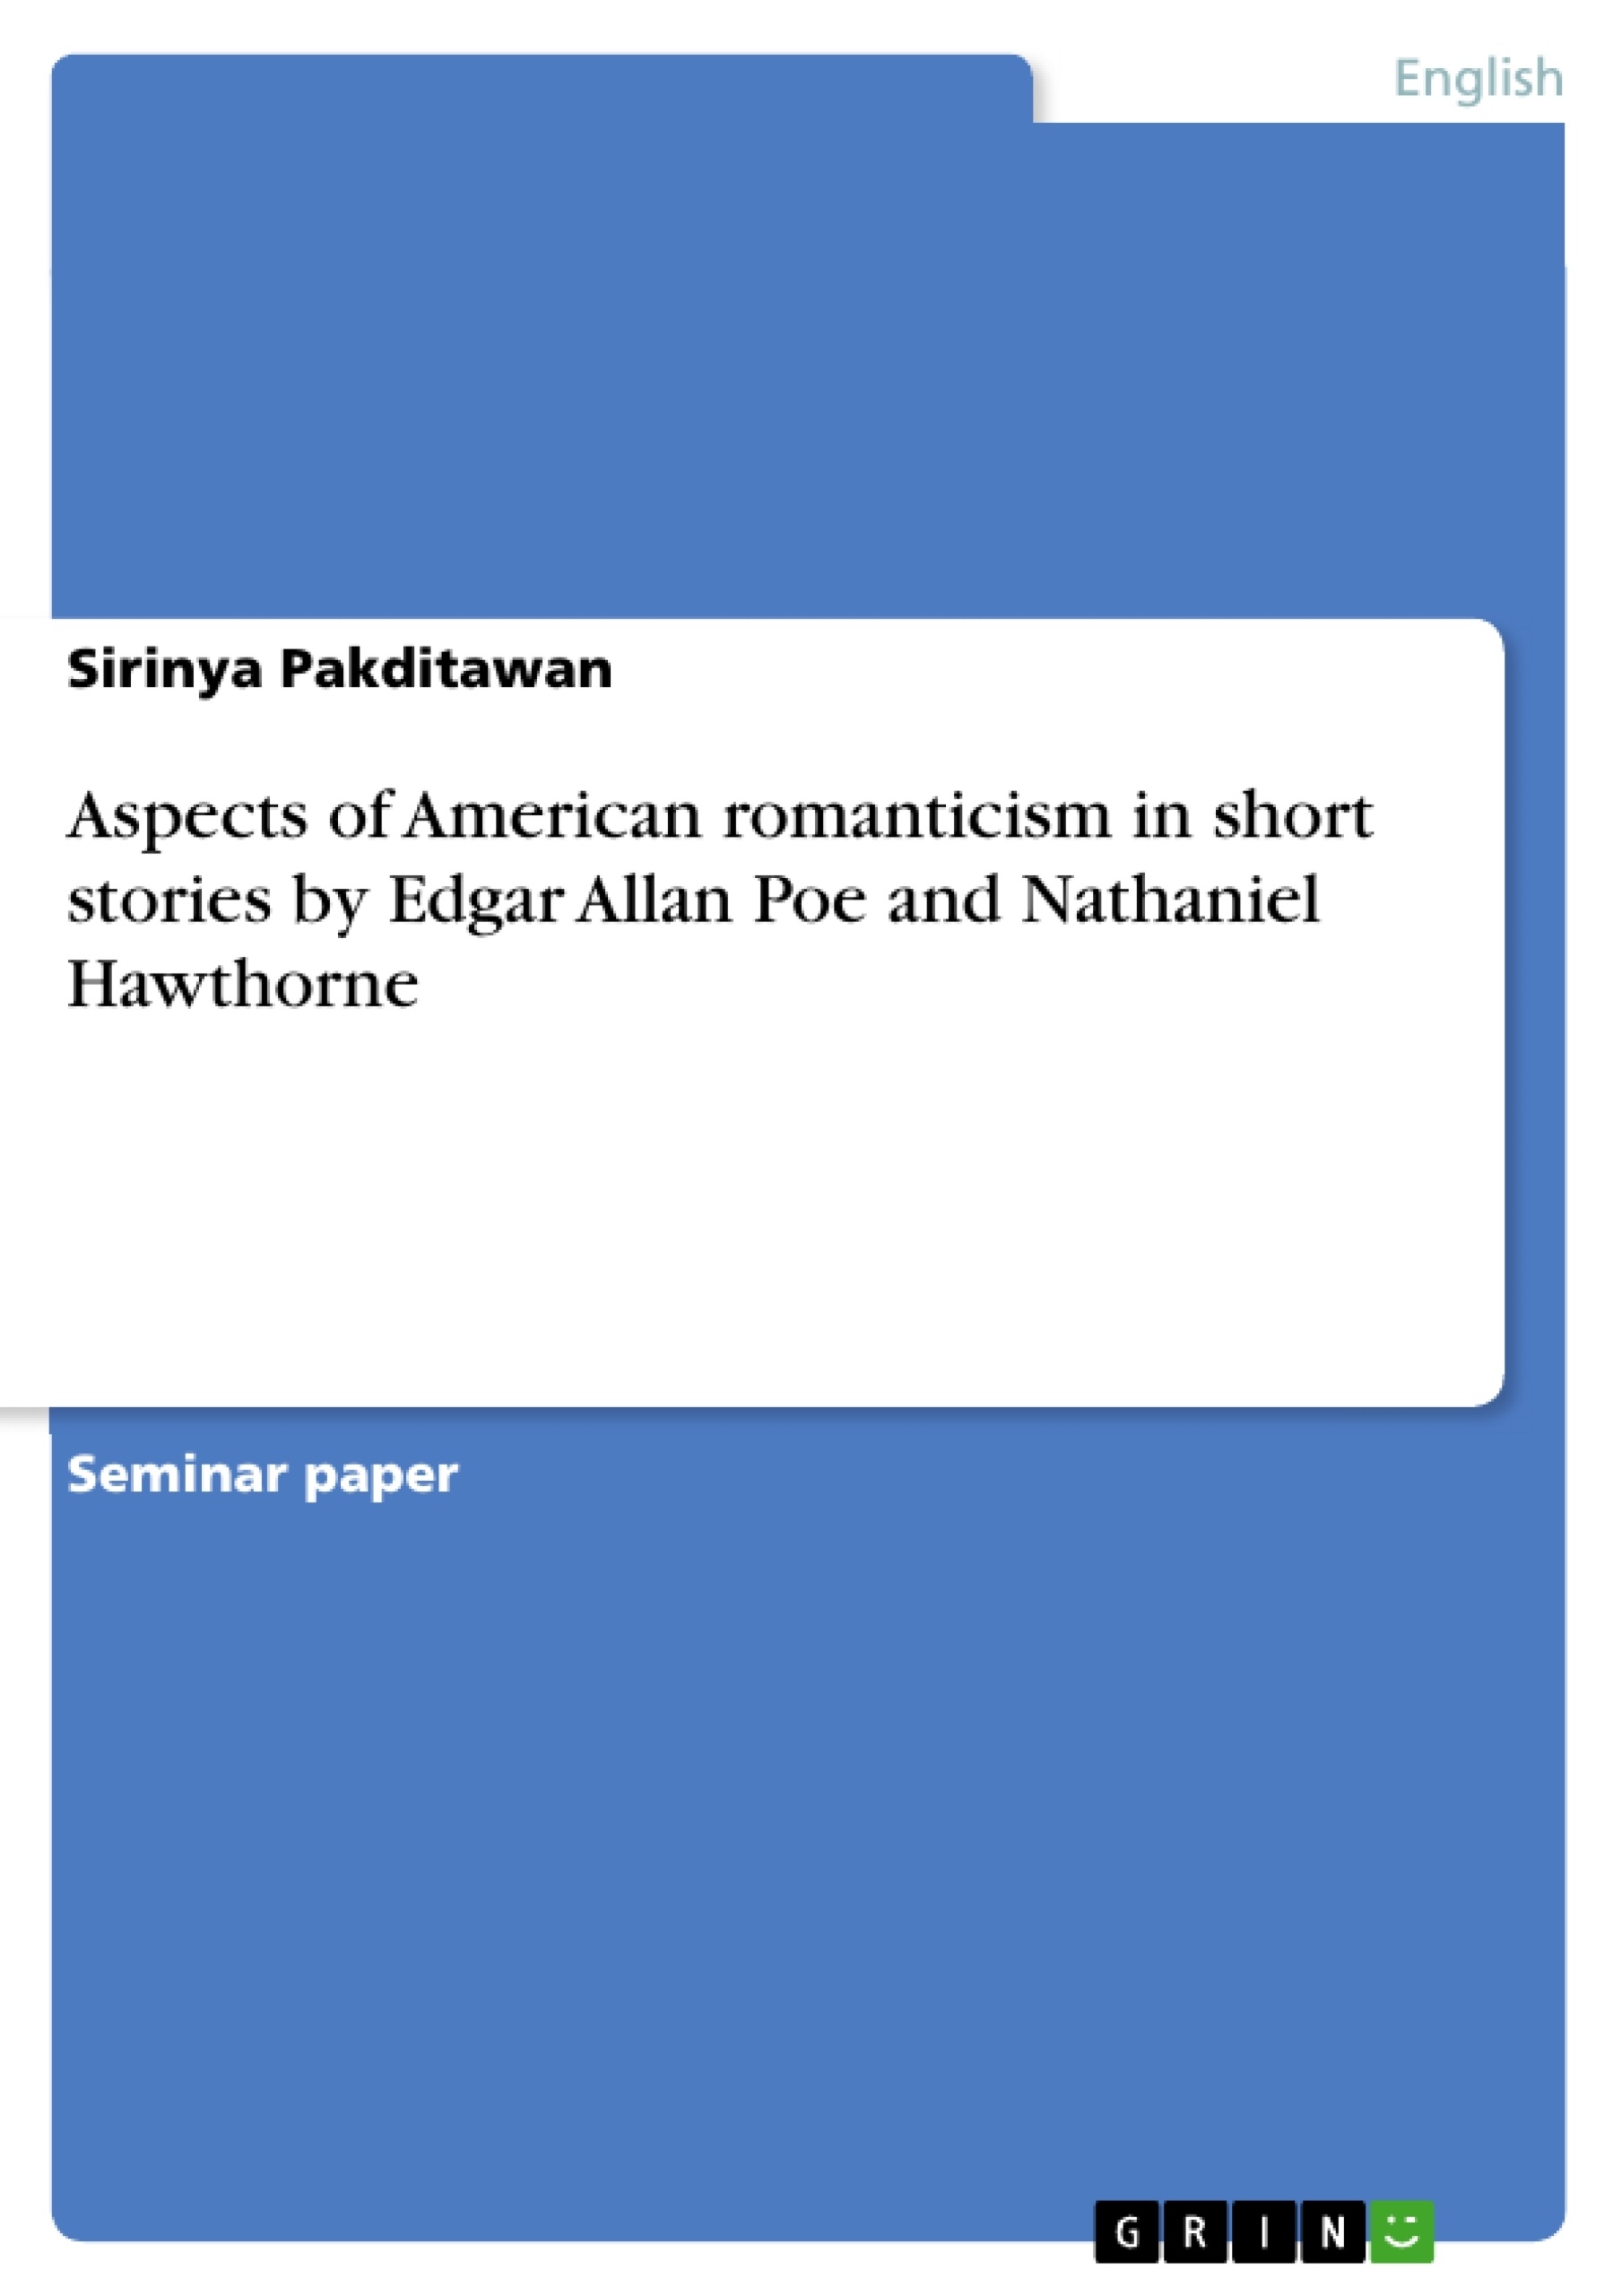 Titre:  Aspects of American romanticism in short stories by Edgar Allan Poe and Nathaniel Hawthorne